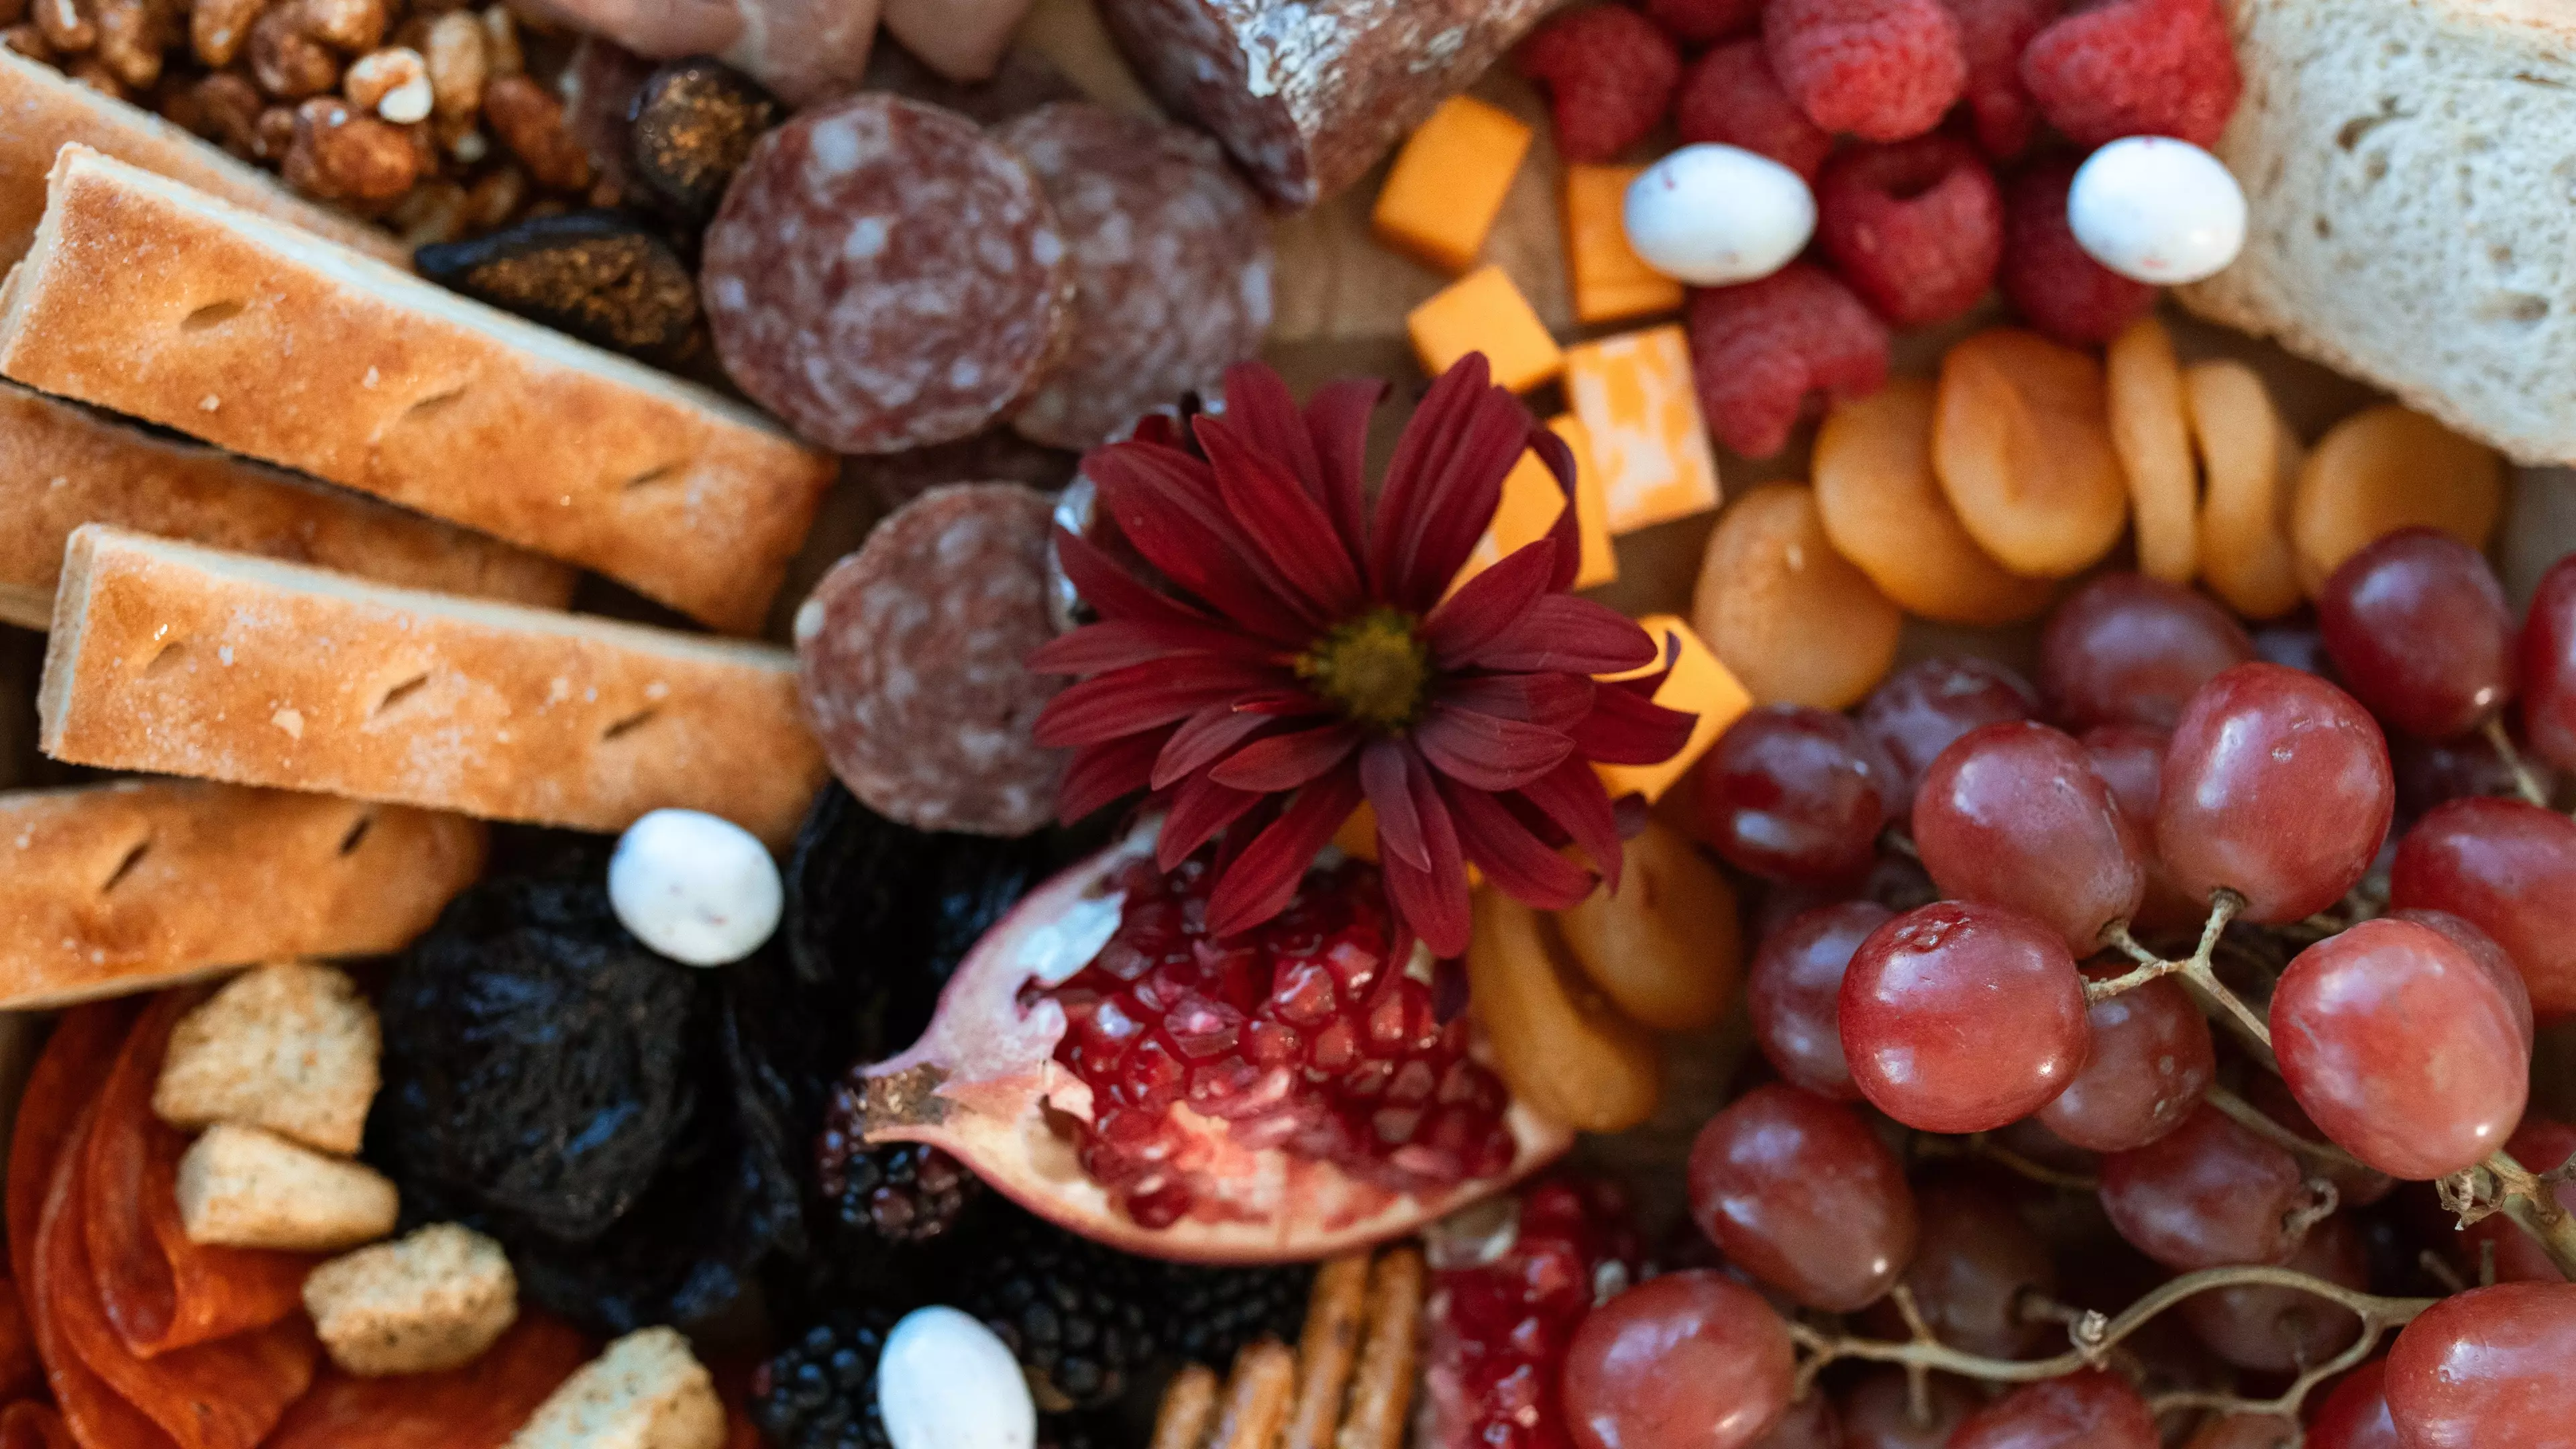 People Are Creating Amazing Charcuterie Wreaths - And They Look Delicious